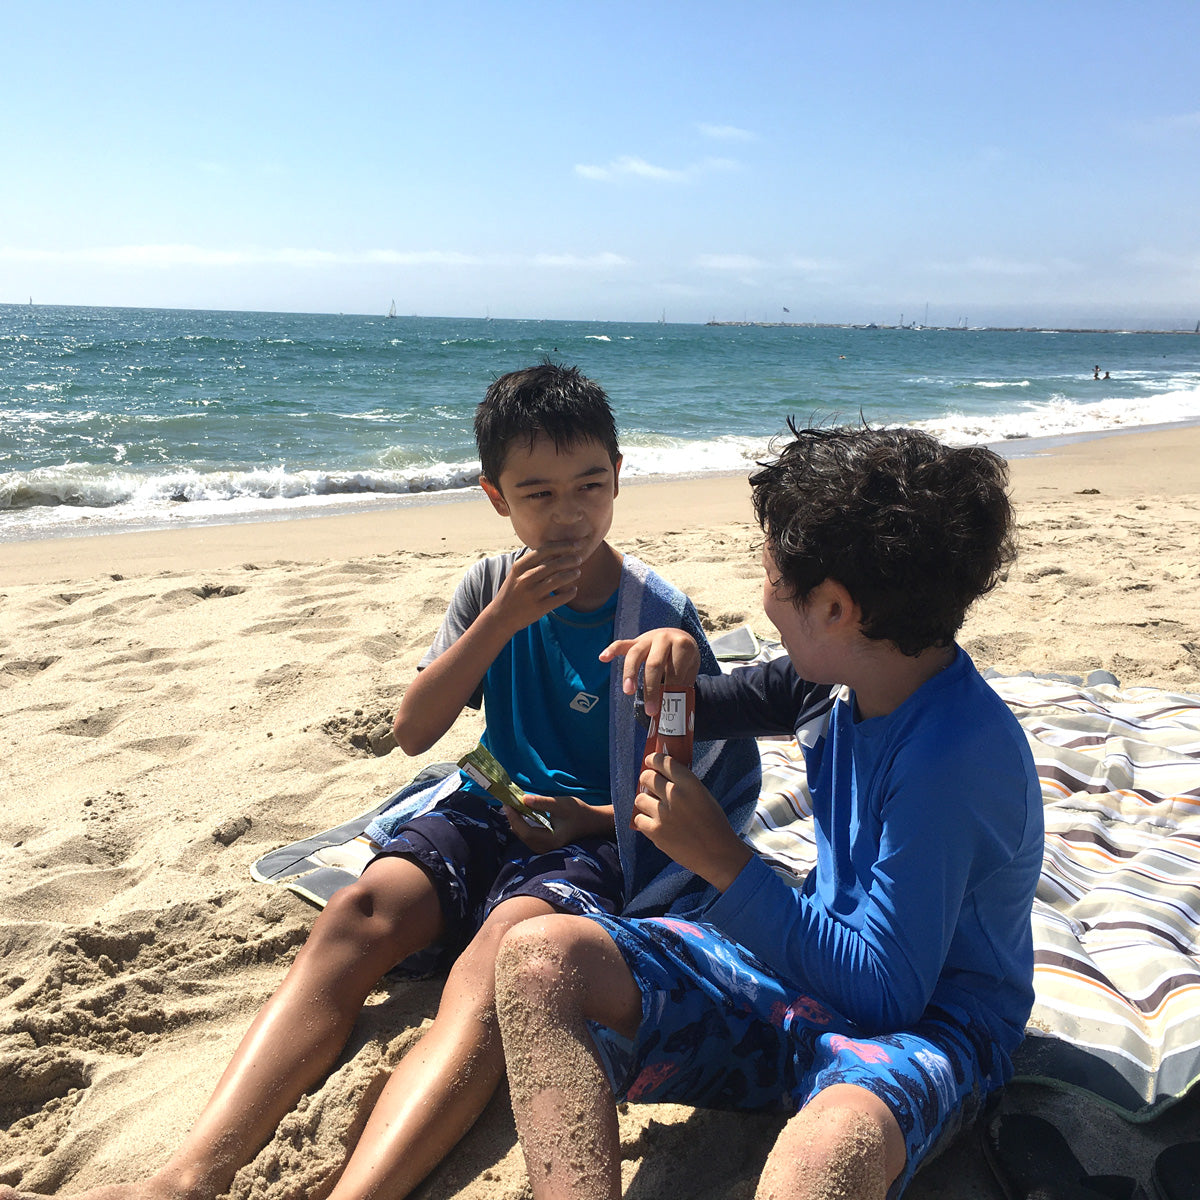 Two kids eating SPIRIT Almond at the beach